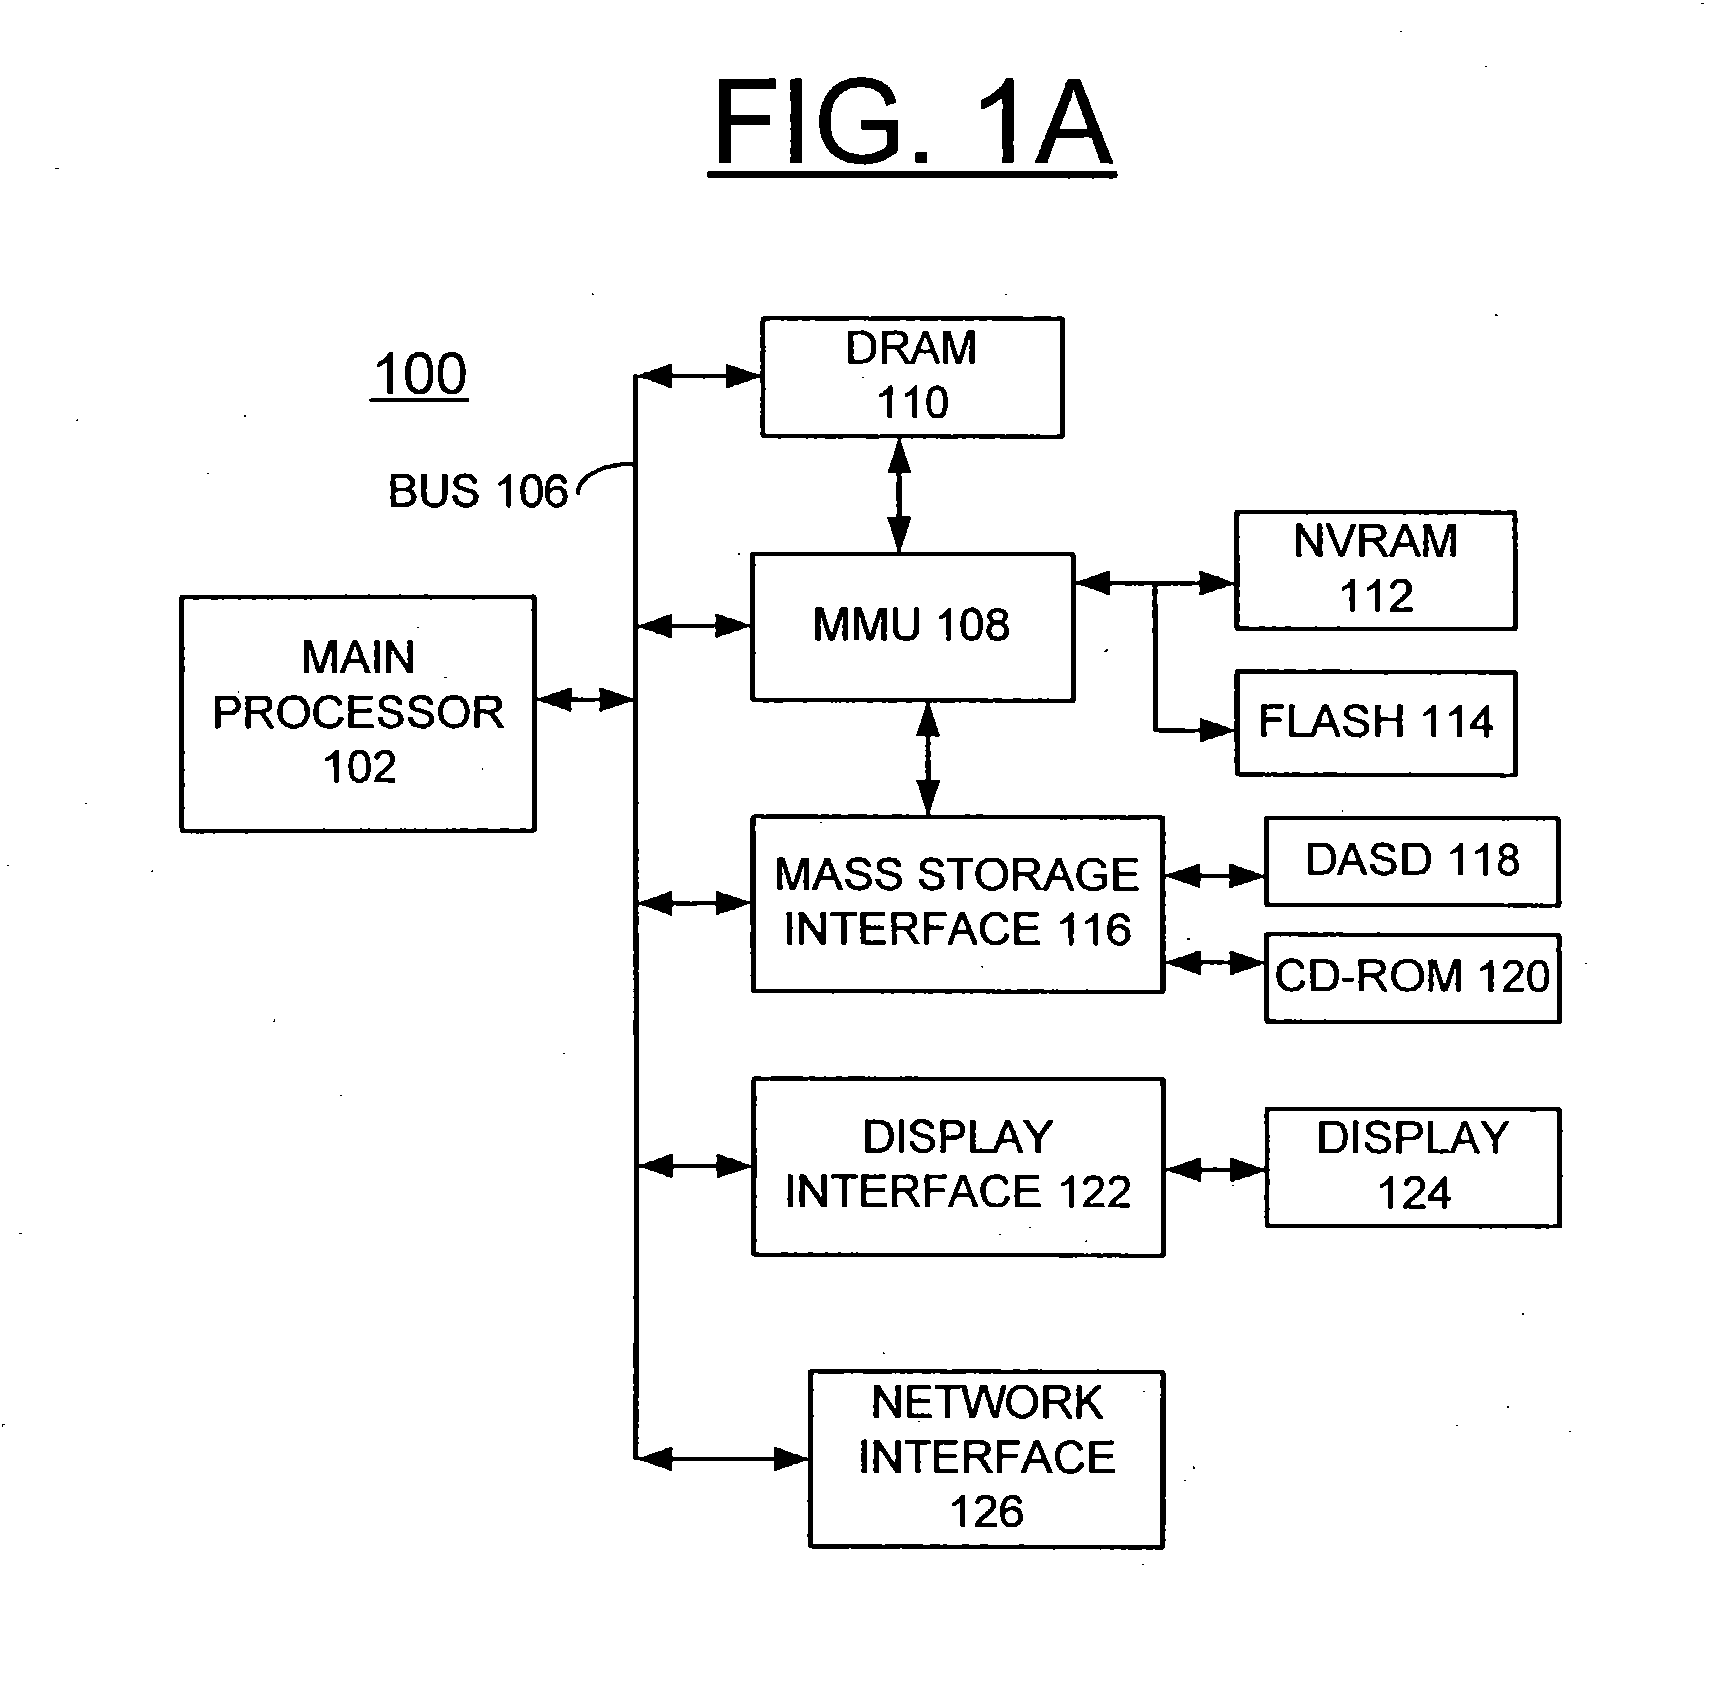 Method, apparatus and computer program product for implementing breakpoint based performance measurement